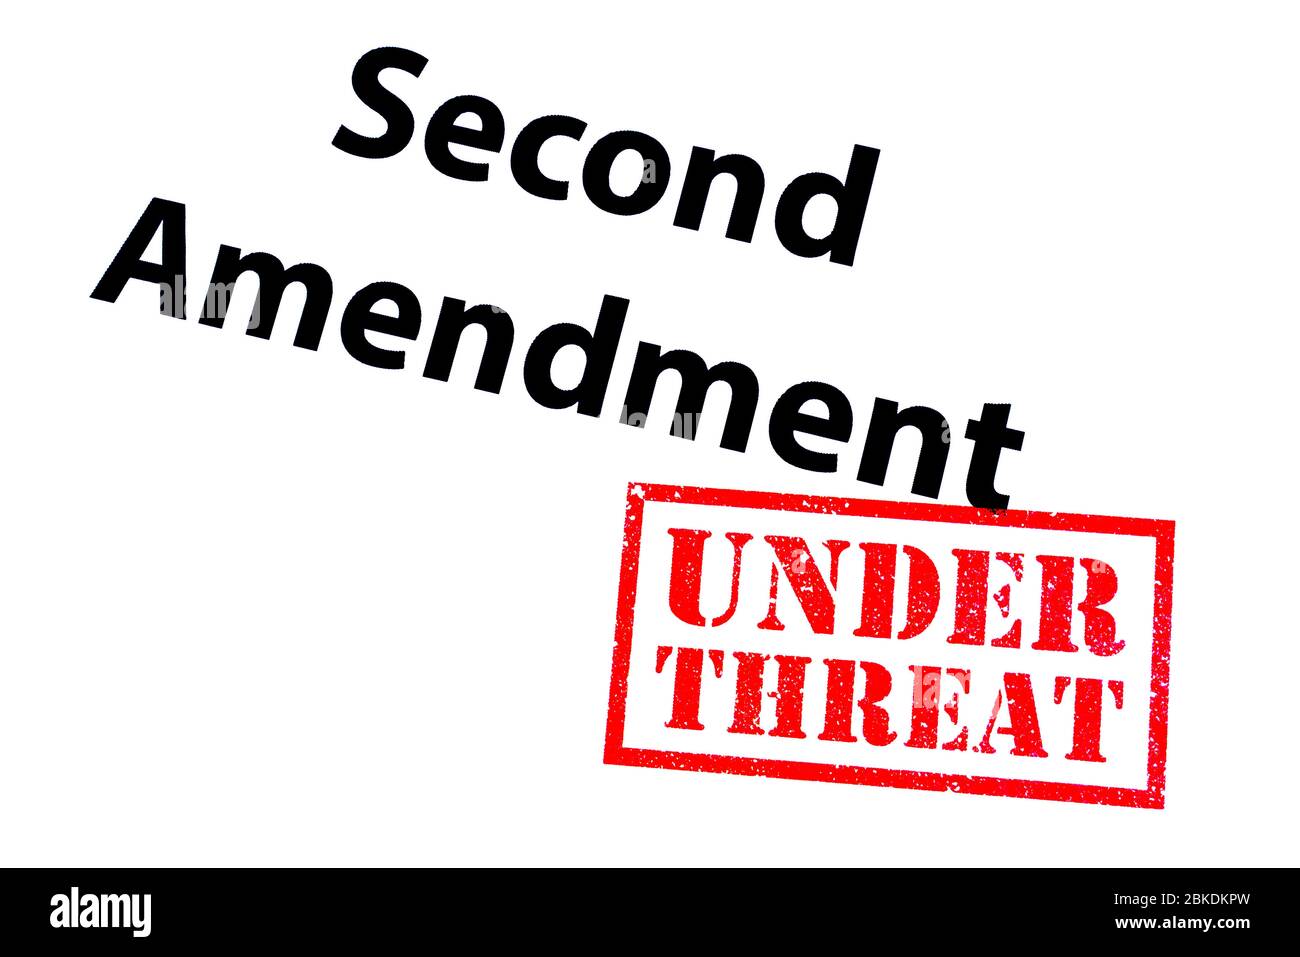 Second Amendment heading with a red UNDER THREAT rubber stamp. Stock Photo